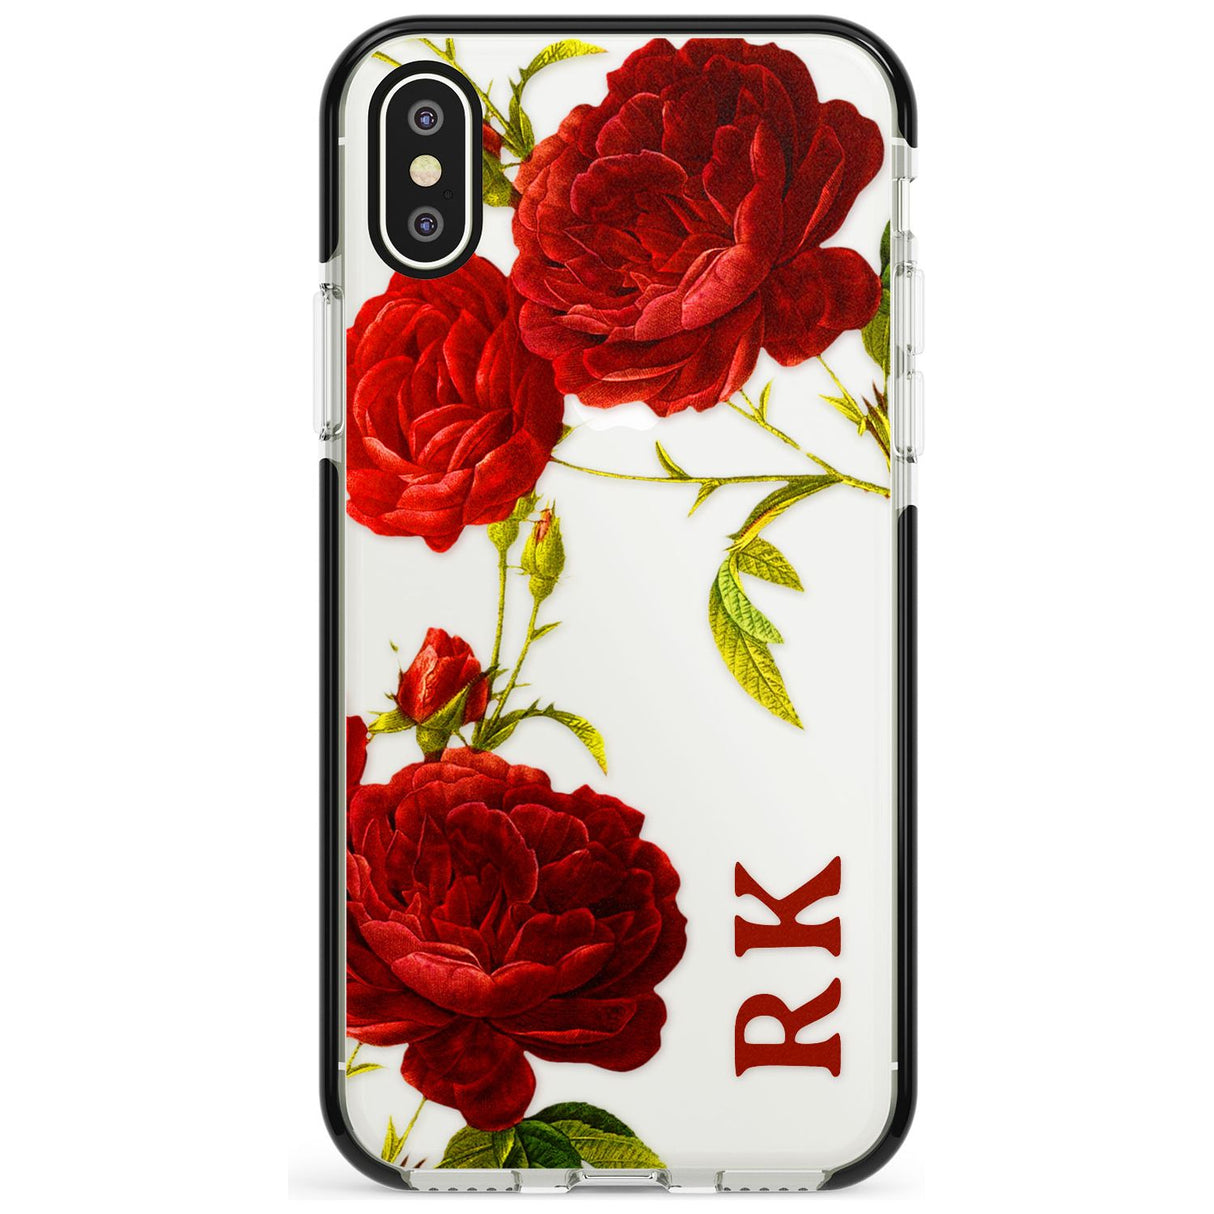 Custom Clear Vintage Floral Red Roses Black Impact Phone Case for iPhone X XS Max XR